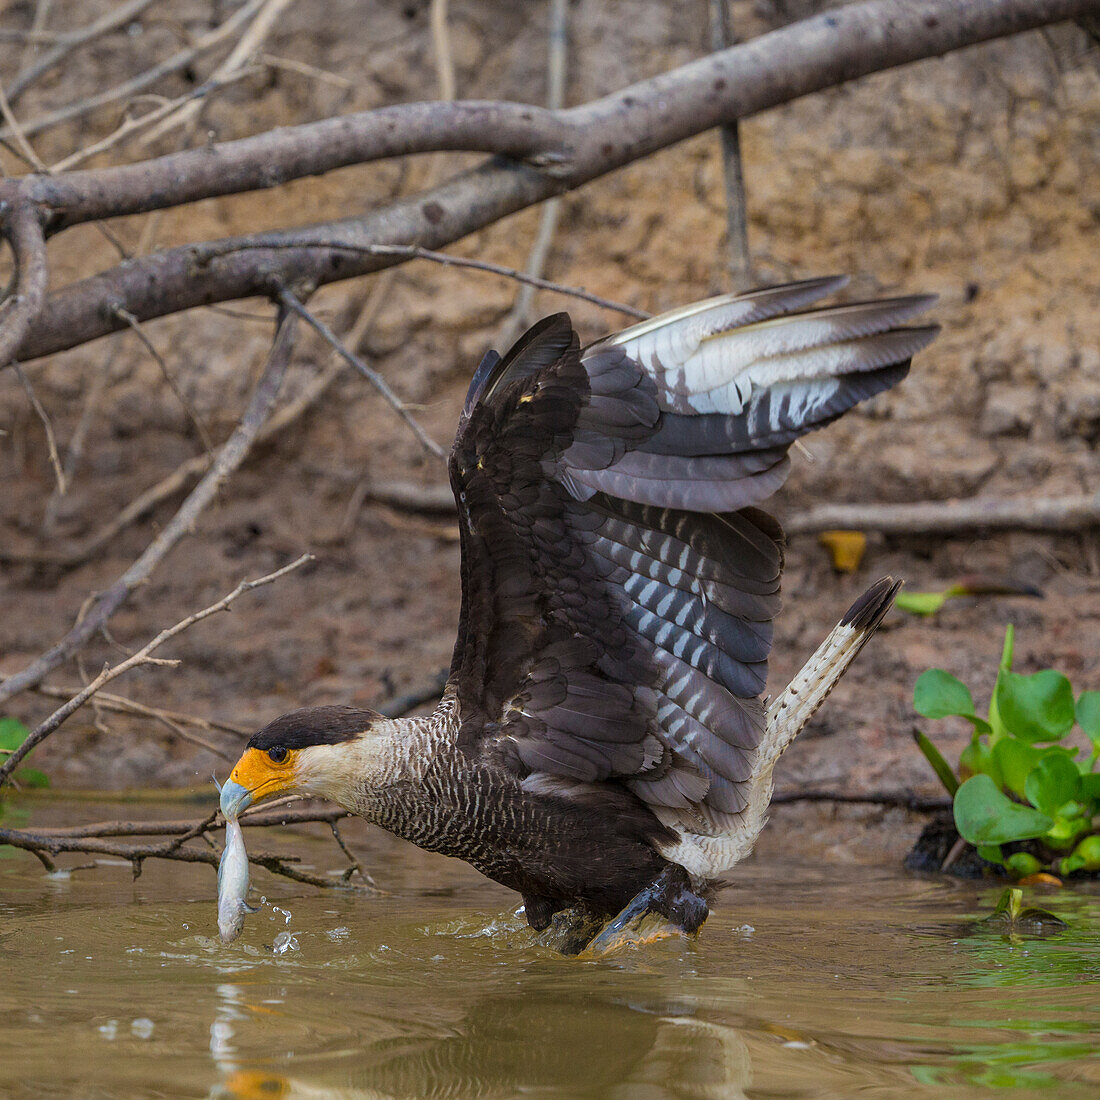 Brazil. Crested Caracara (Caracara plancus) is a raptor related to falcons and shown here fishing along a river's edge in the Pantanal, the world's largest tropical wetland area, UNESCO World Heritage Site.